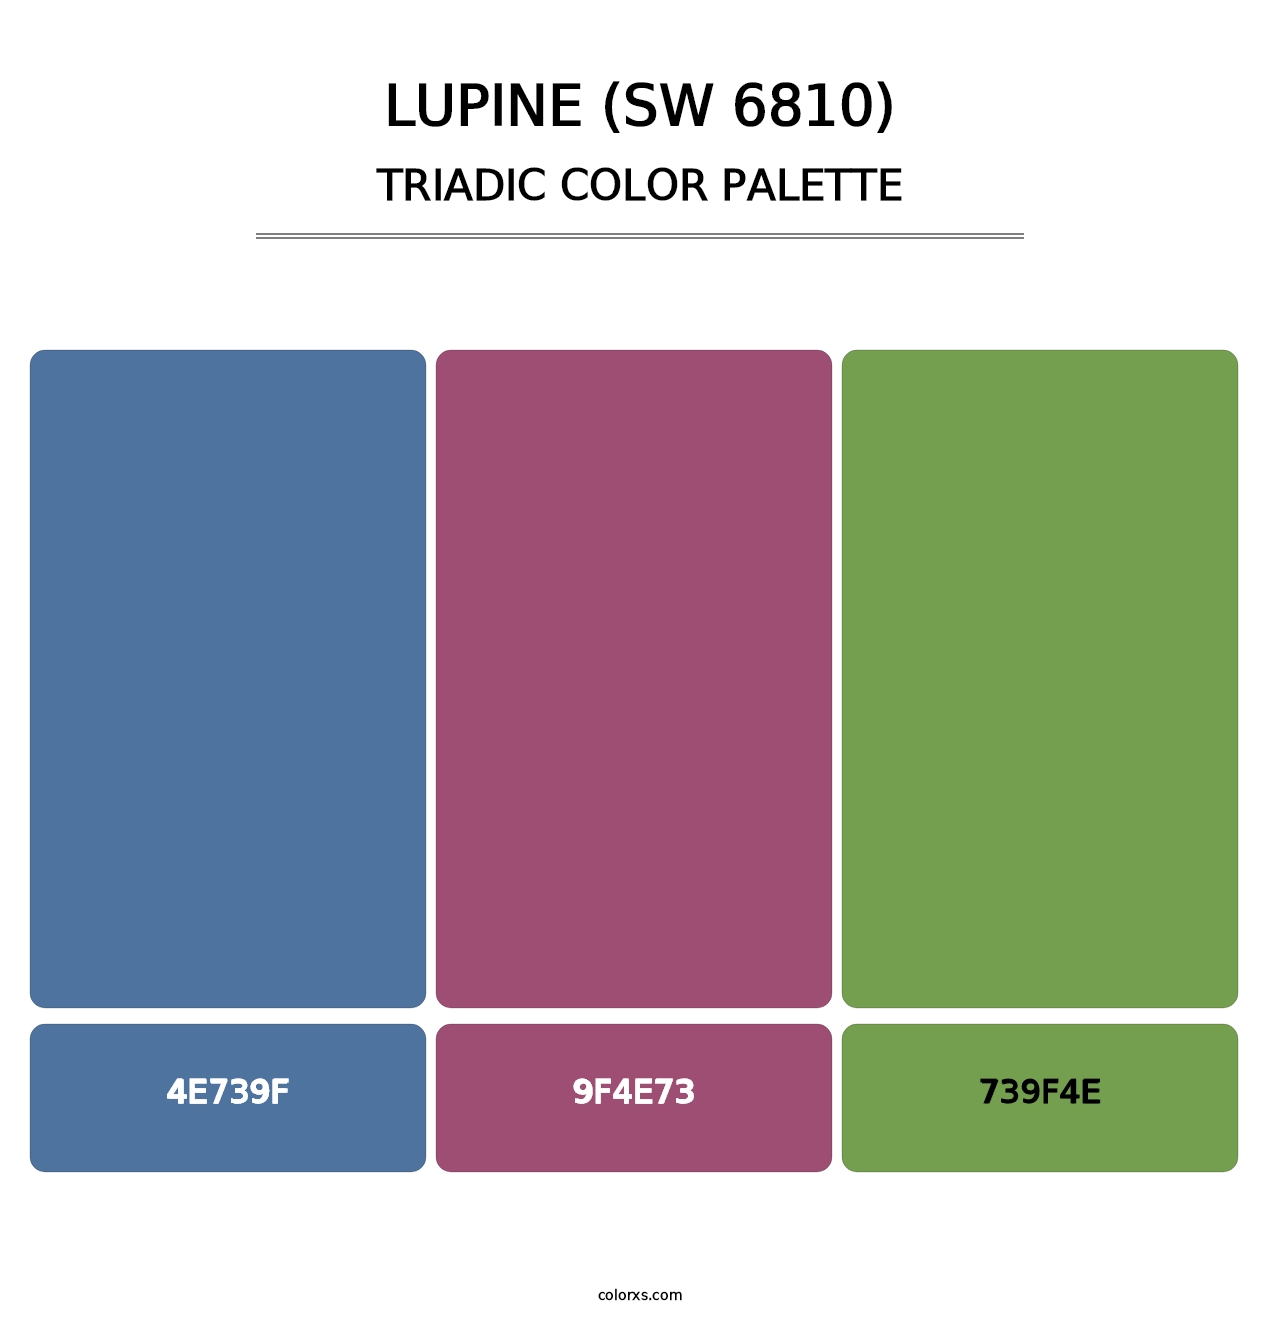 Lupine (SW 6810) - Triadic Color Palette